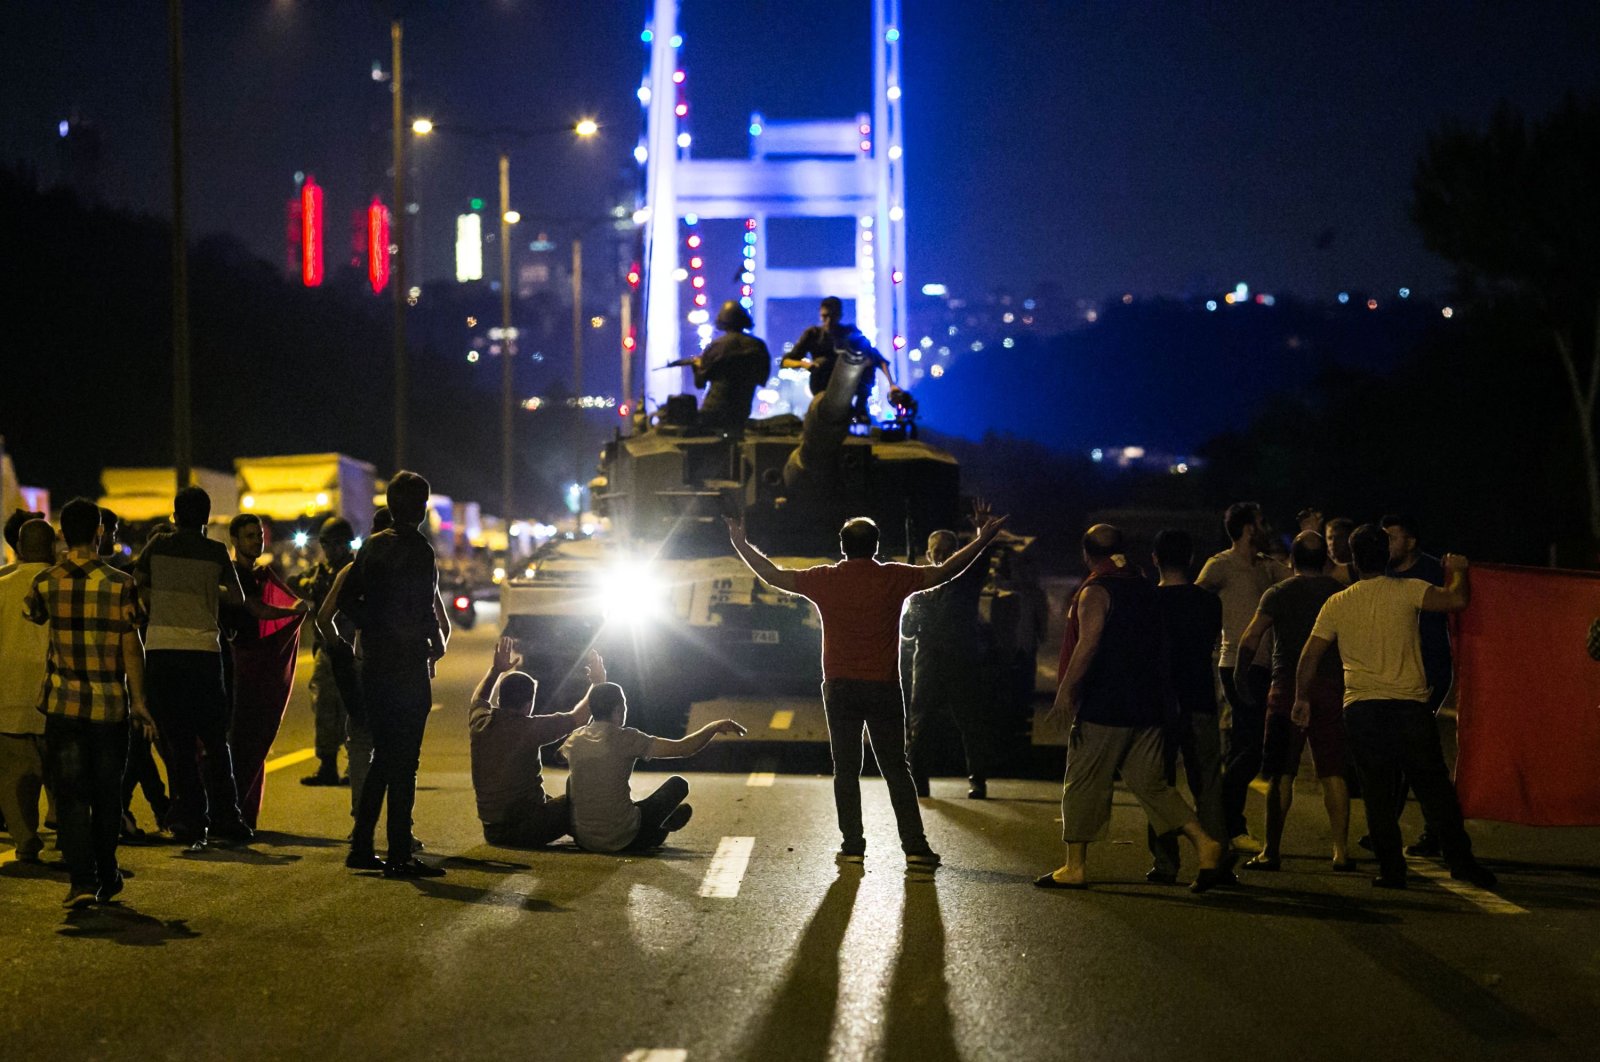 People take over a tank controlled by putschists near the Fatih Sultan Mehmet Bridge, in Istanbul, Turkey, July 16, 2016. (AFP PHOTO)